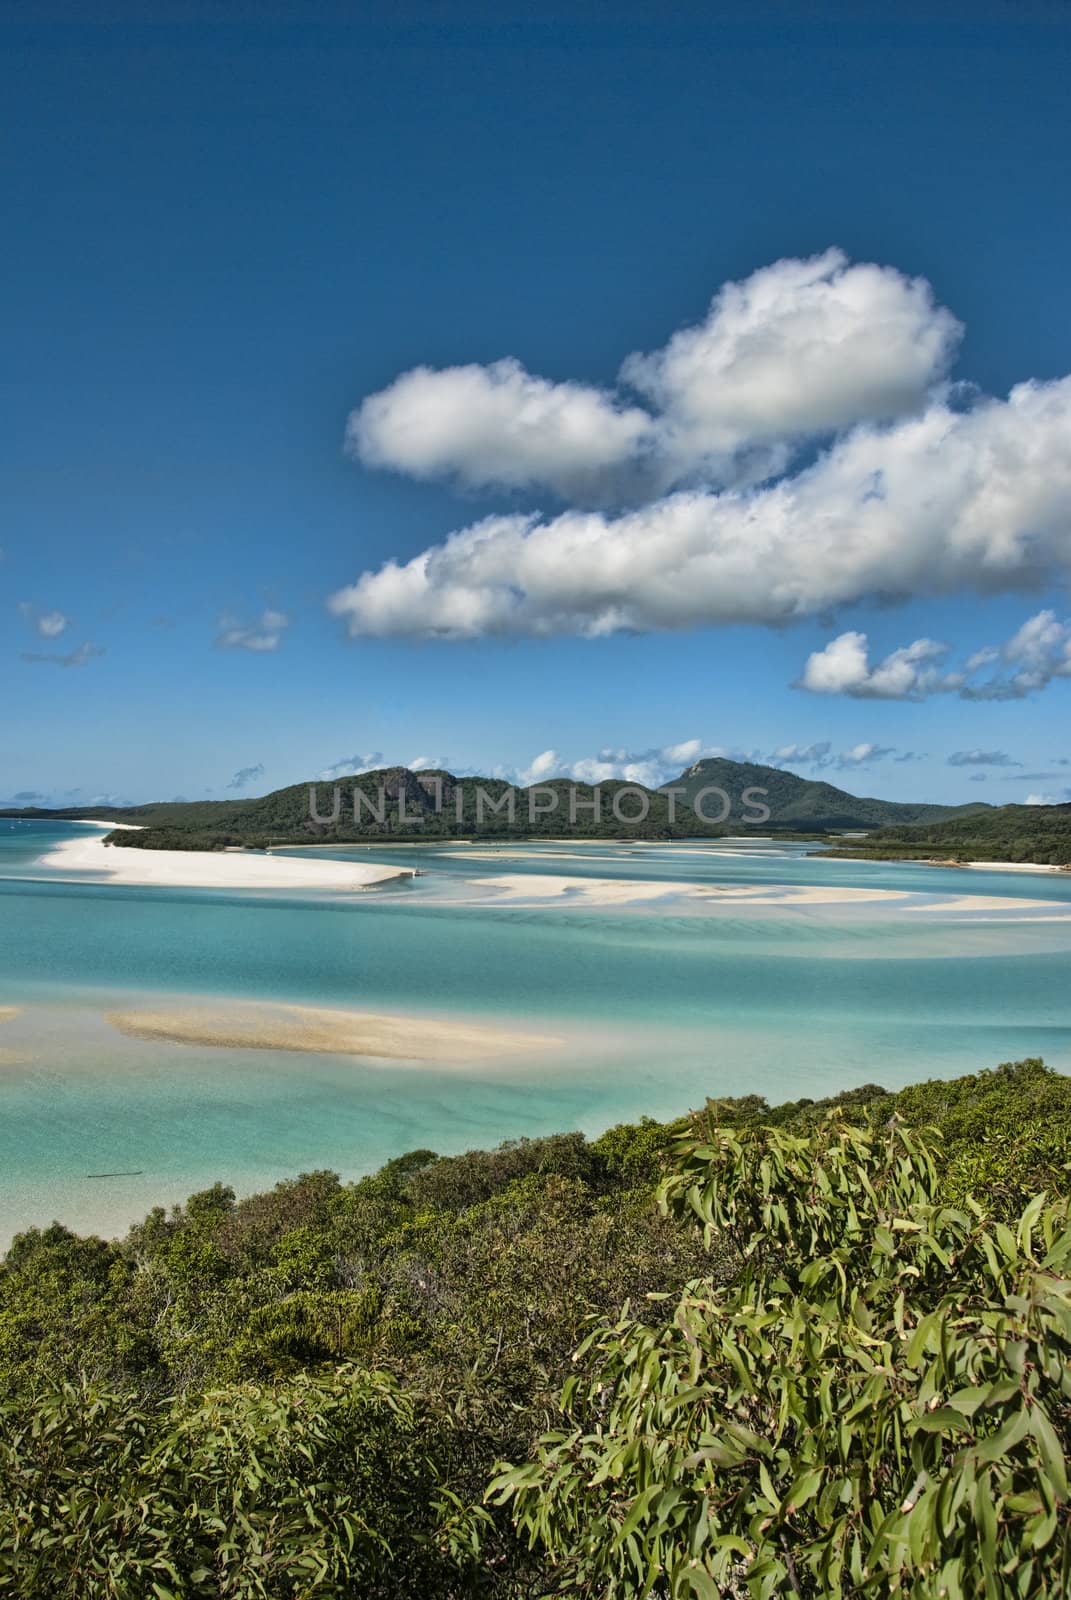 View of the Whitsunday Islands National Park, Queensland